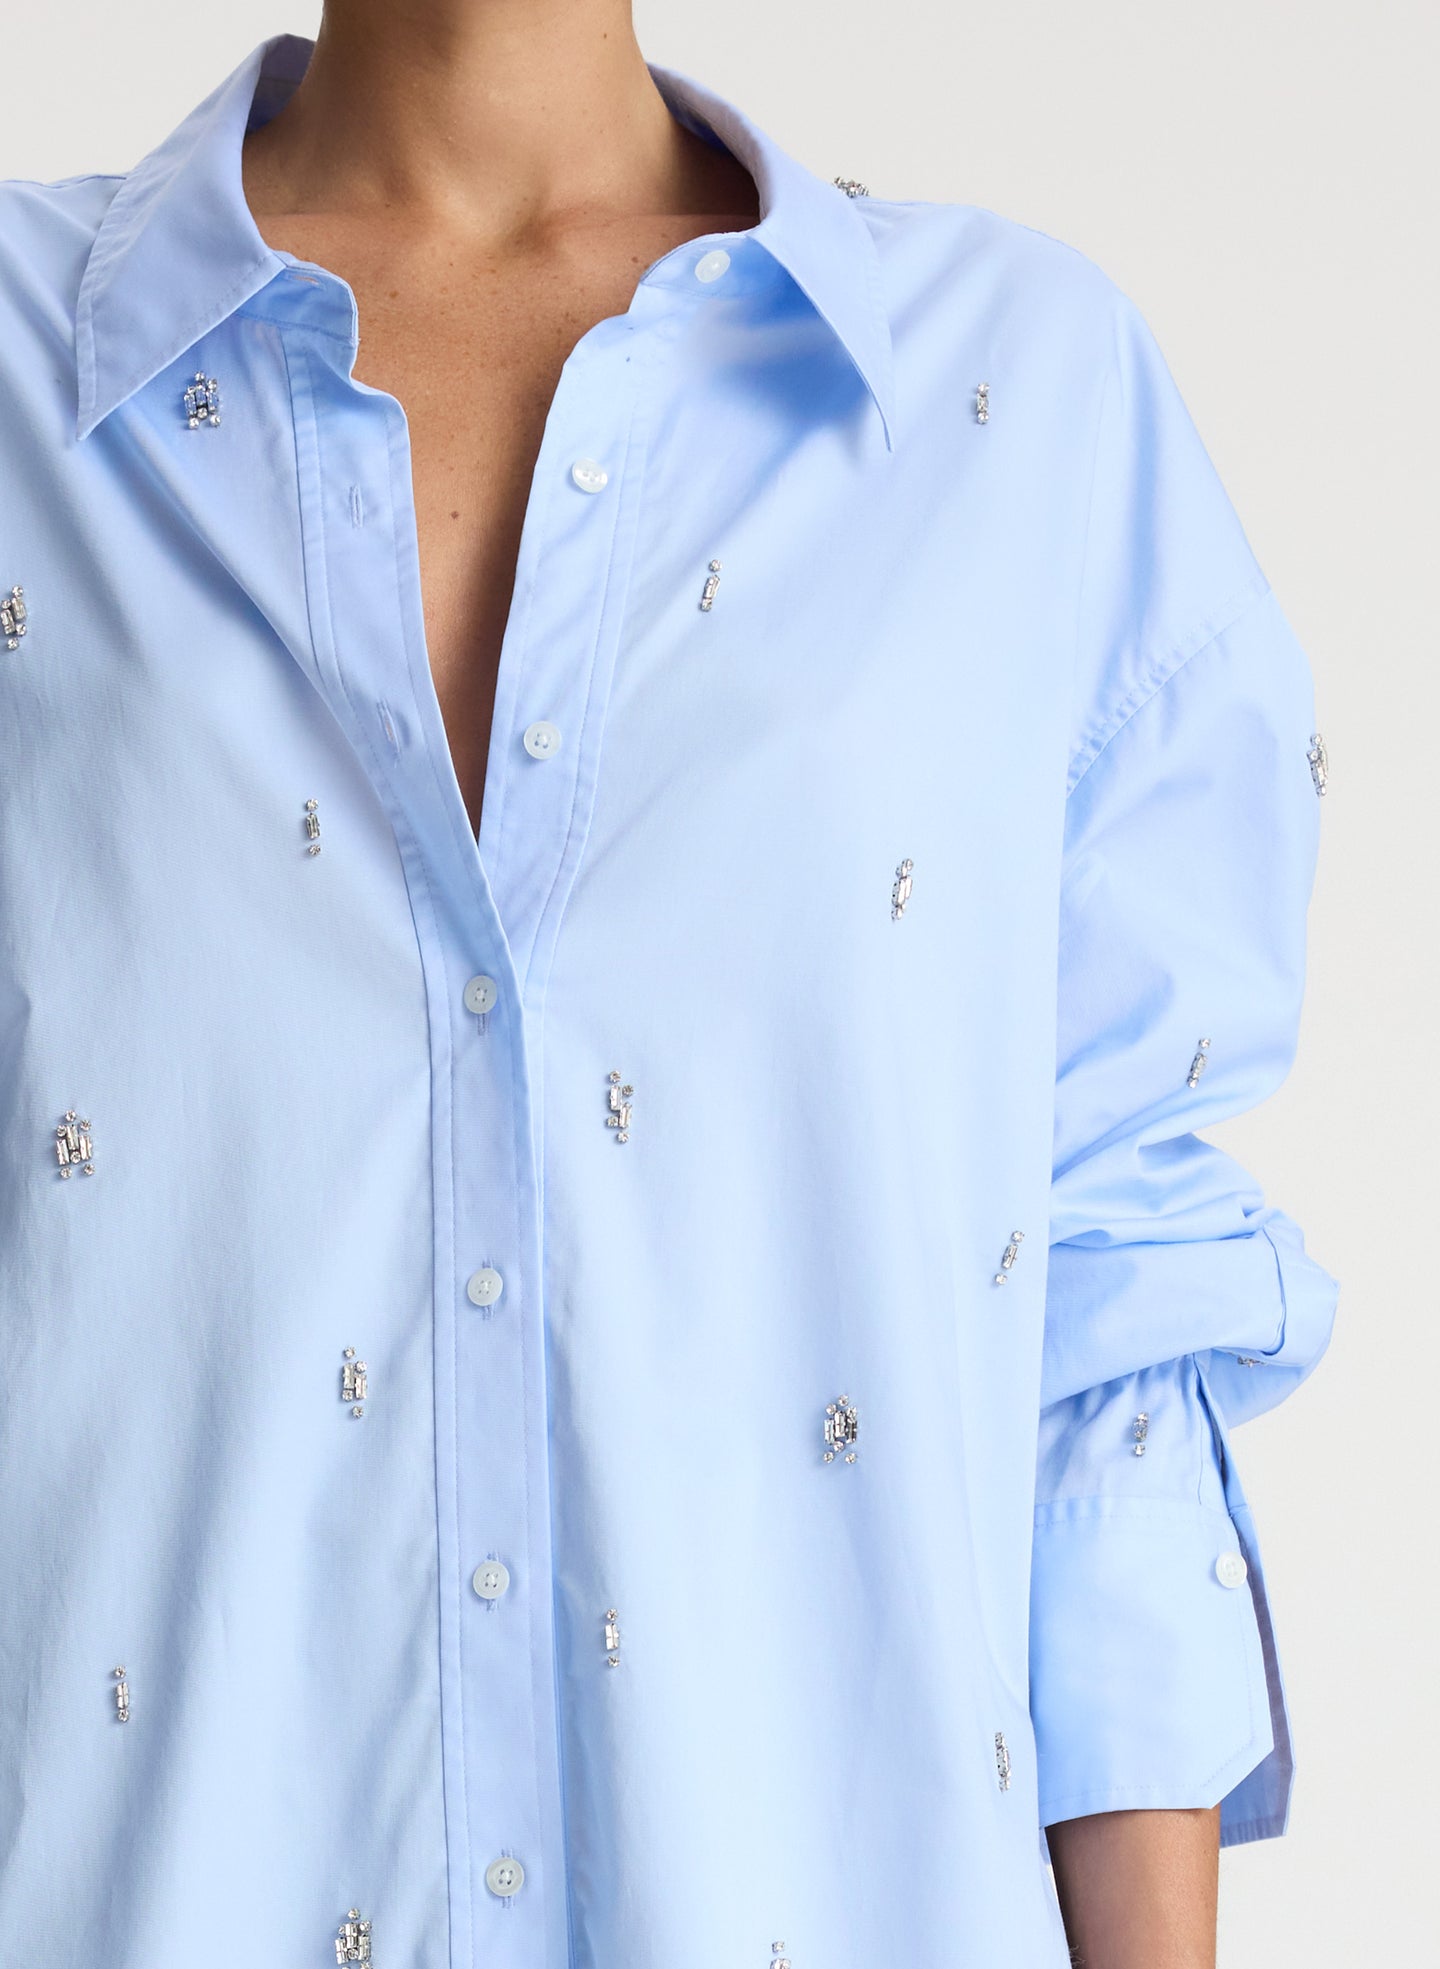 detail view of woman wearing light blue embellished oversized button down shirt and black pants